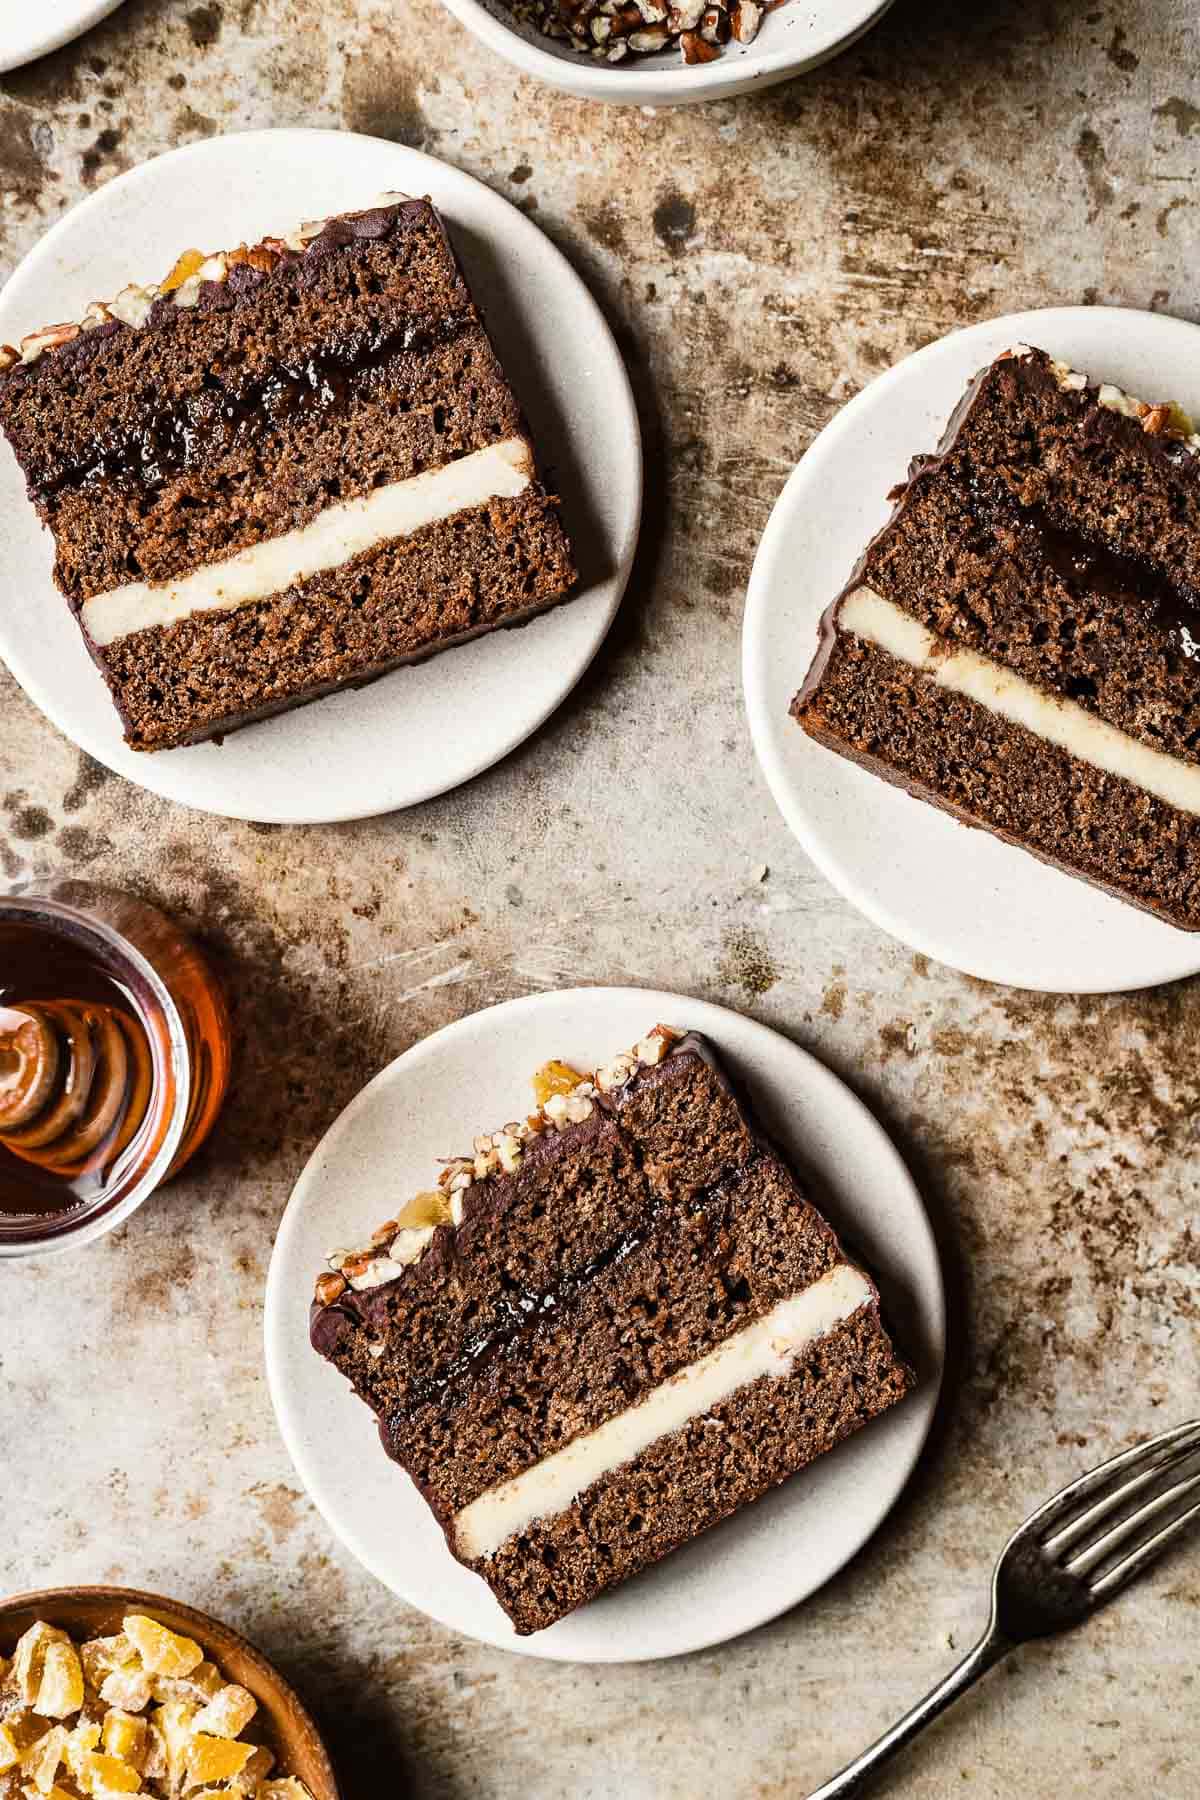 Slices of Polish honey spice cake on tan plates and a brown background.